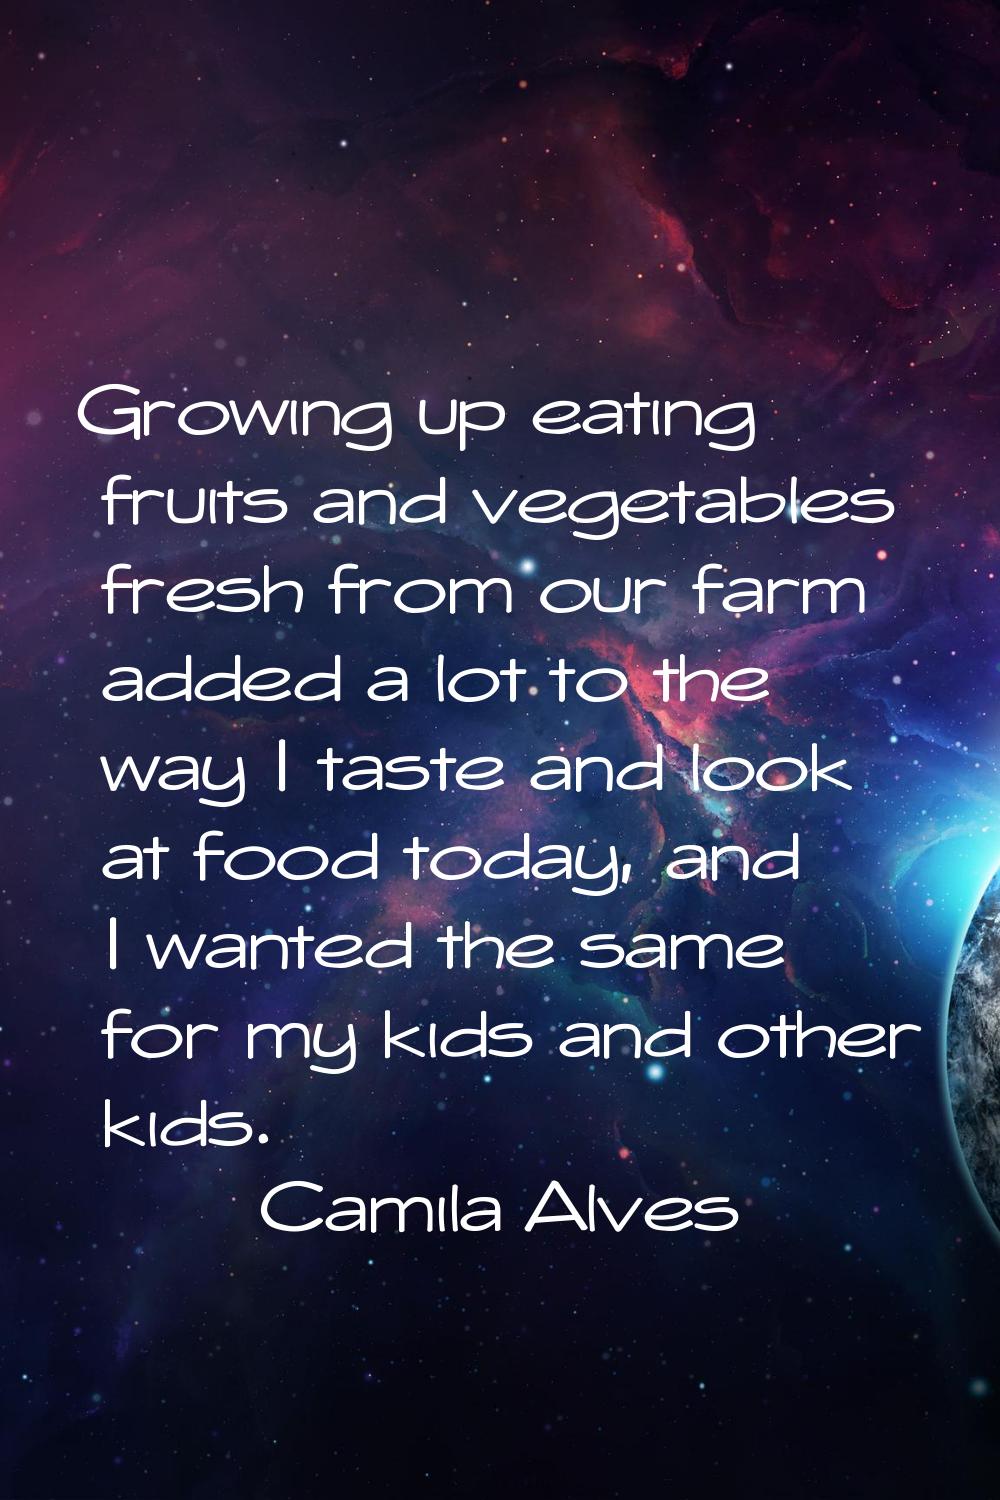 Growing up eating fruits and vegetables fresh from our farm added a lot to the way I taste and look